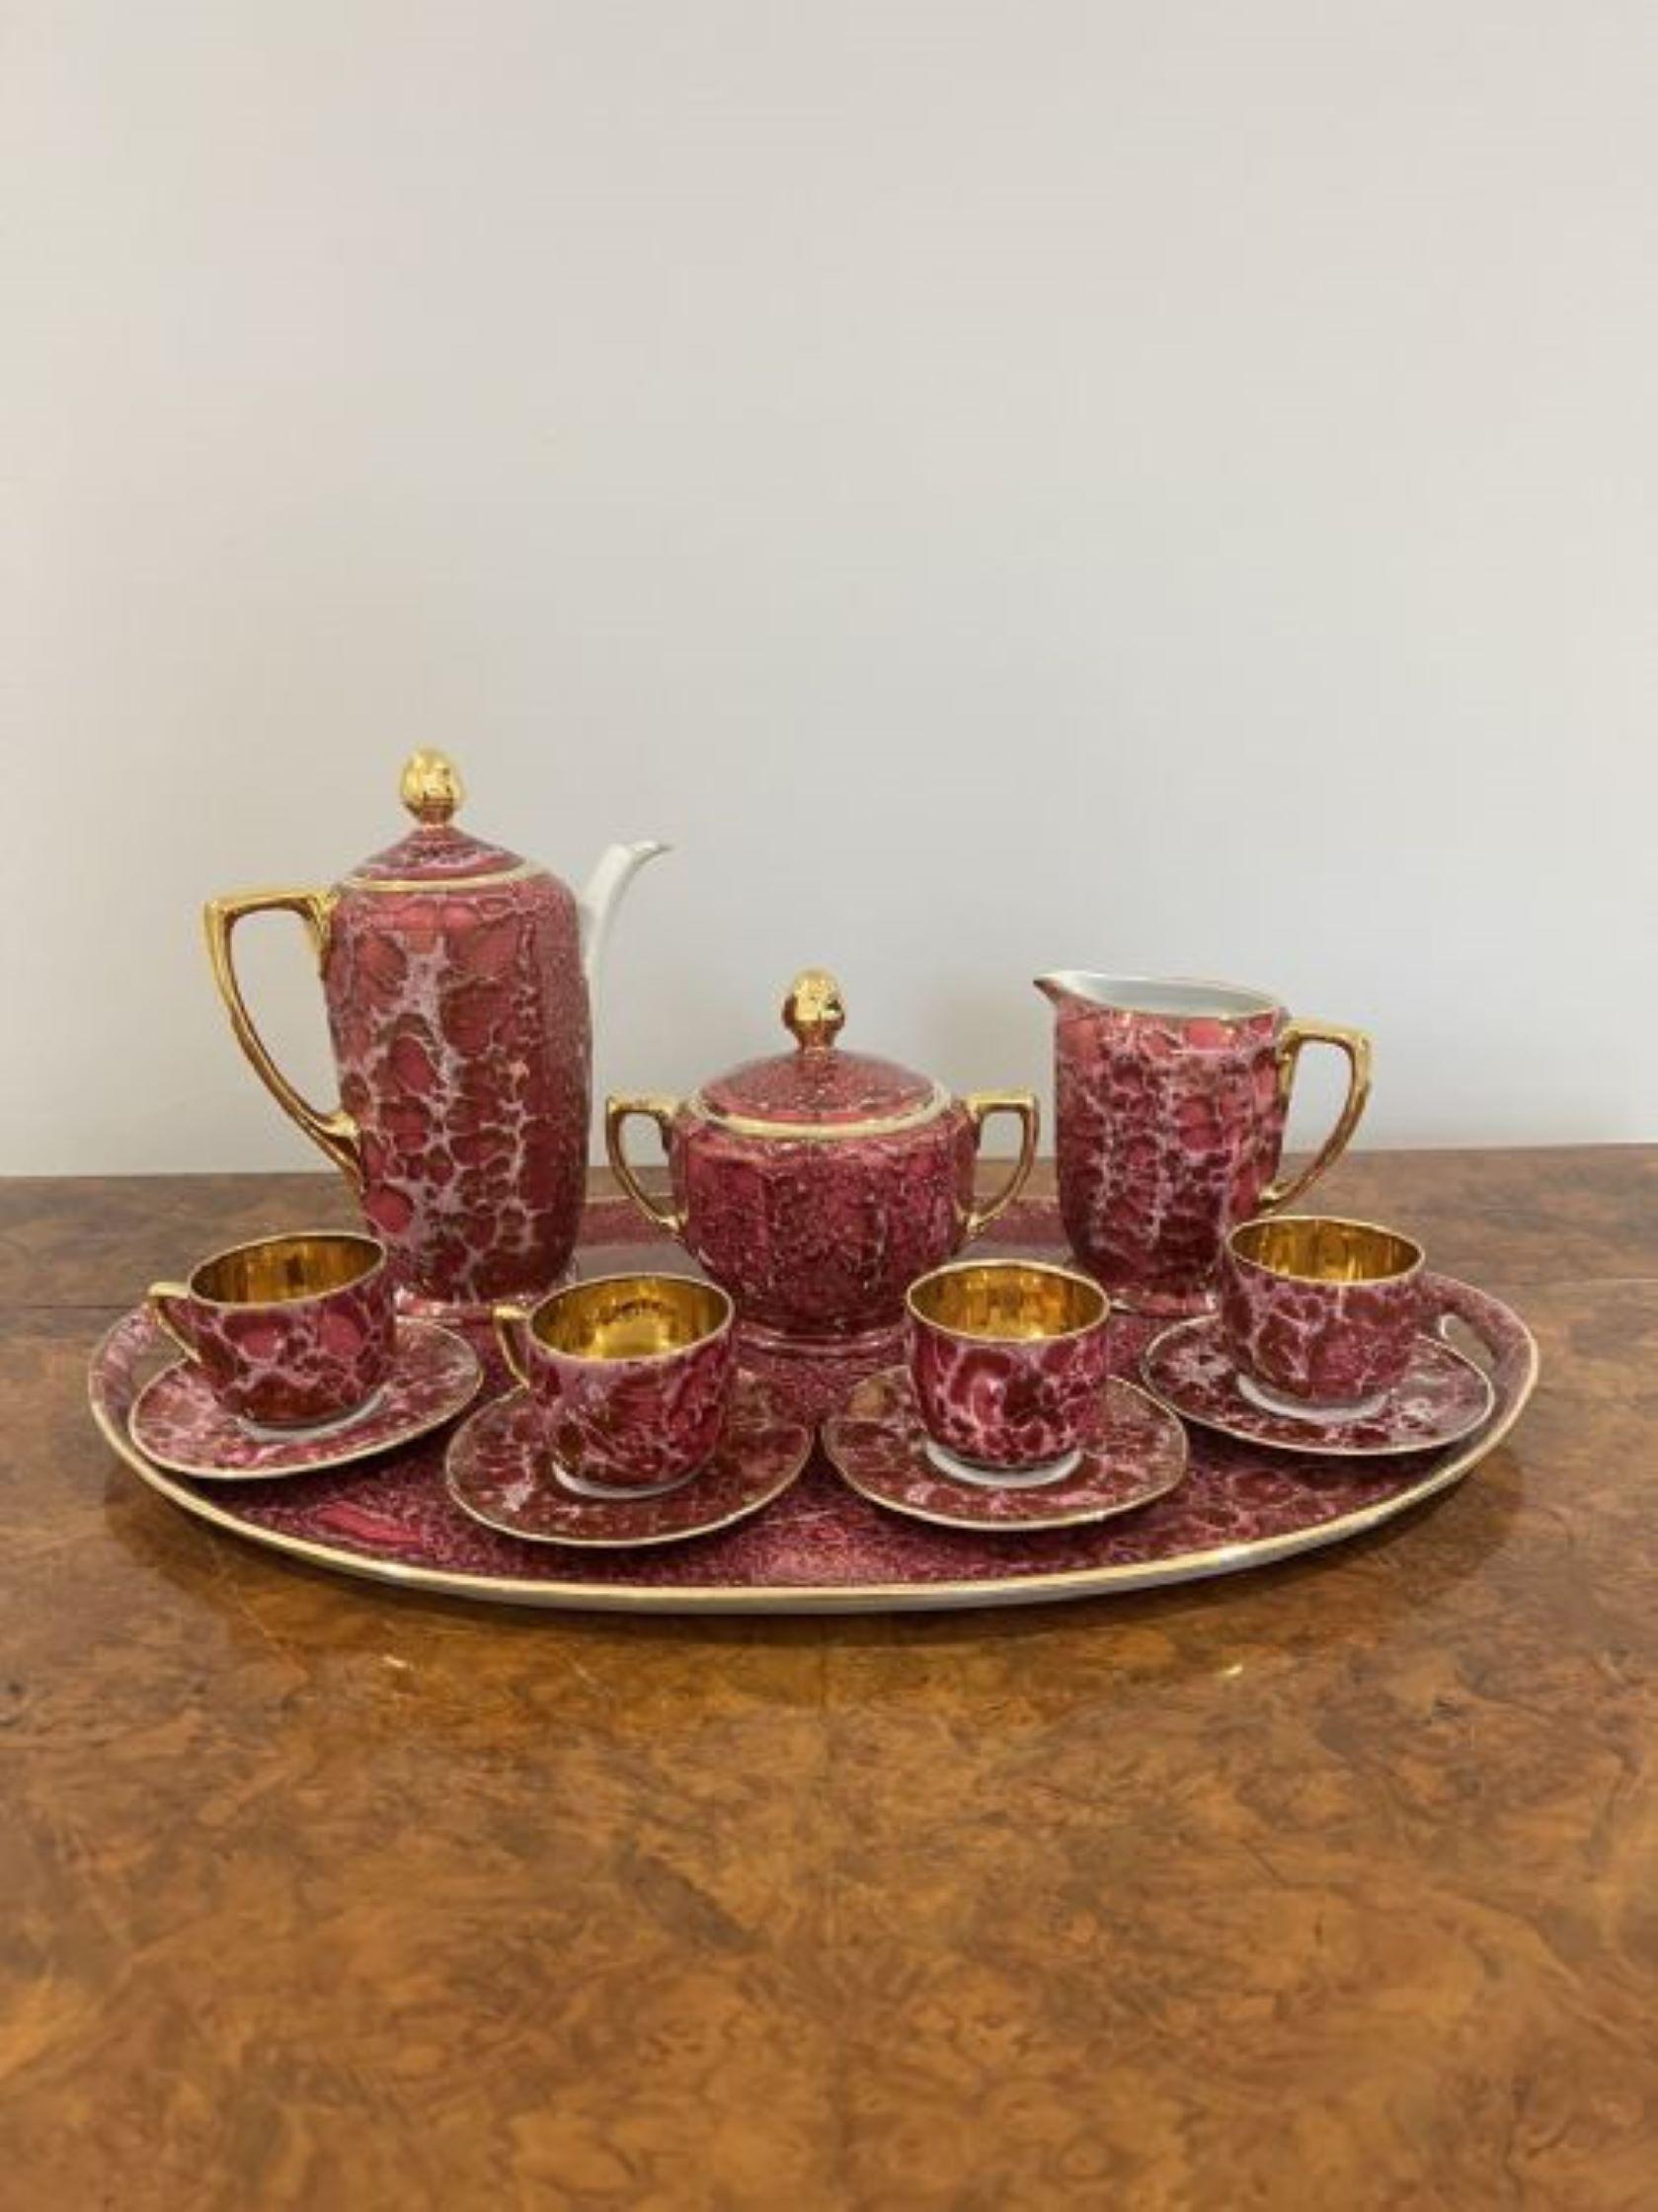 Quality Antique Porcelain Coffee Set In Good Condition For Sale In Ipswich, GB